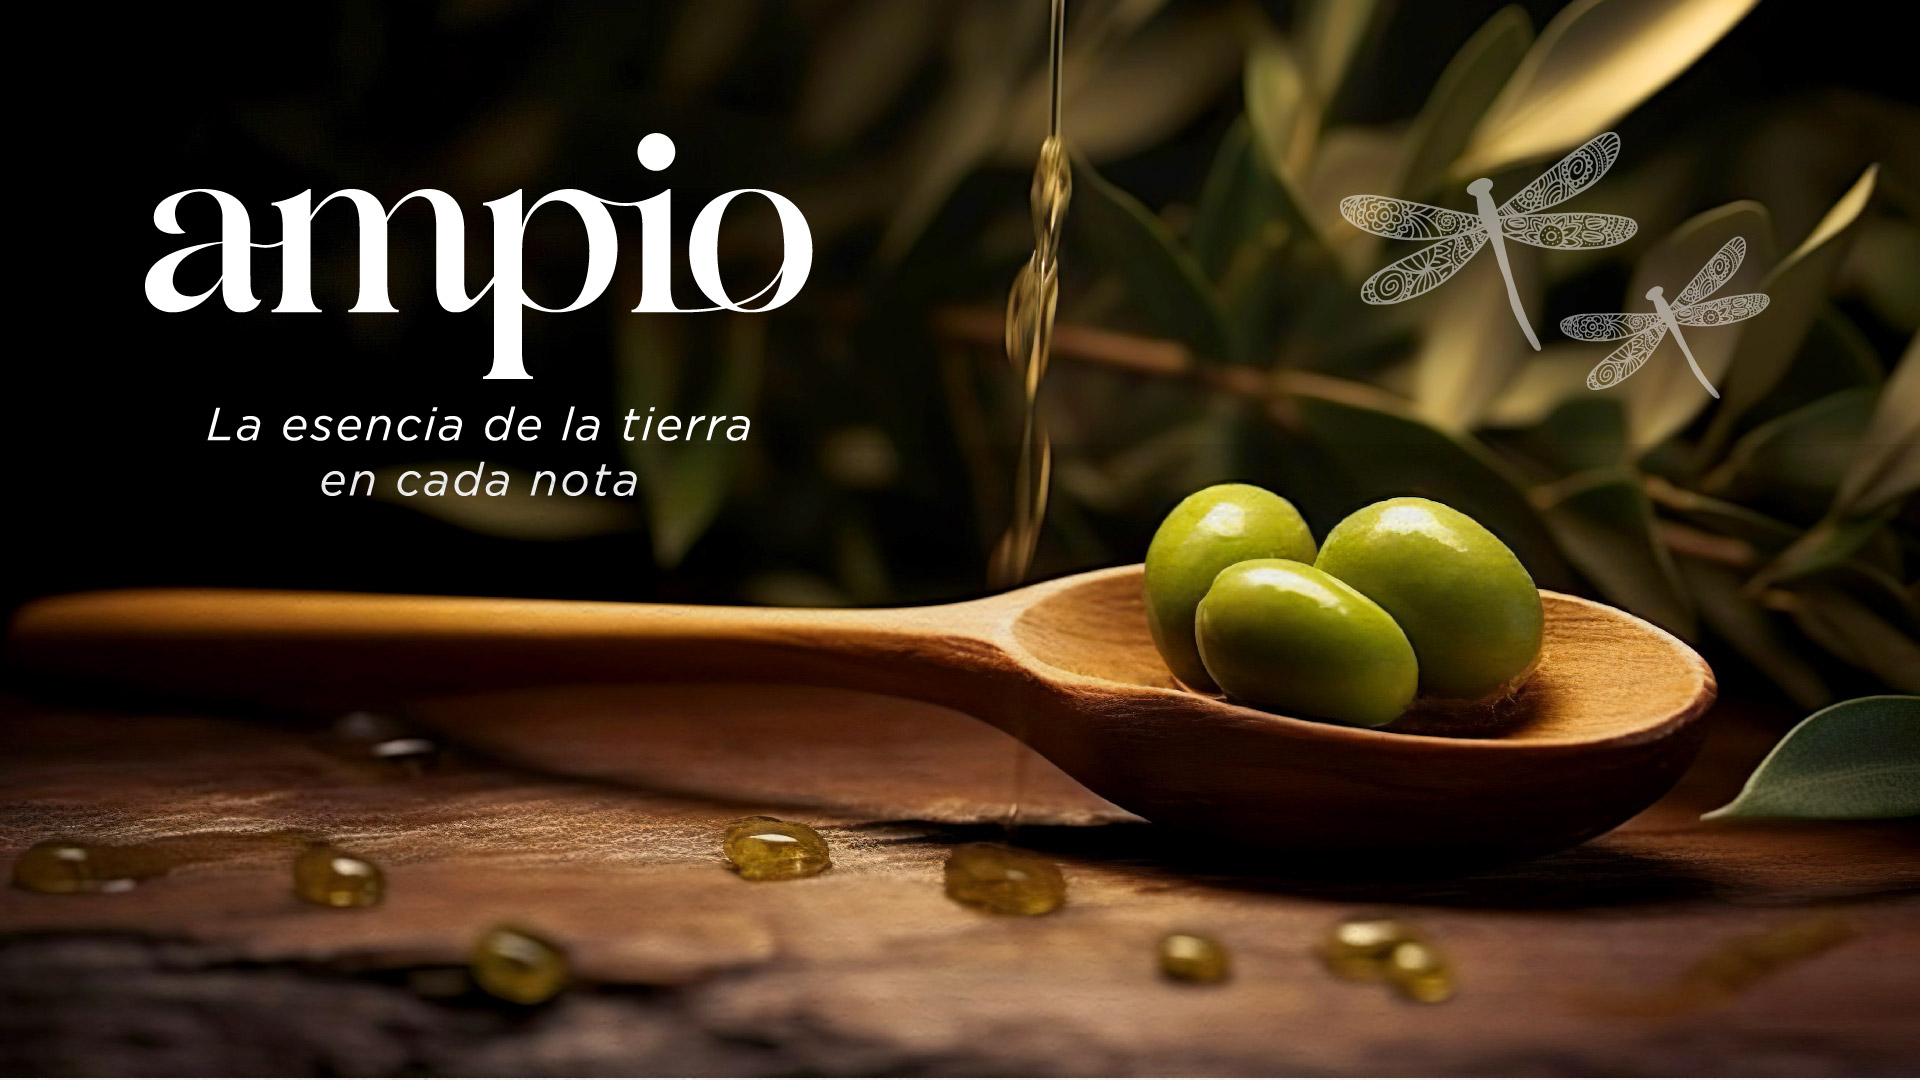 Graphic and creative design of extra virgin olive oil labels for AMPIO ACEITE